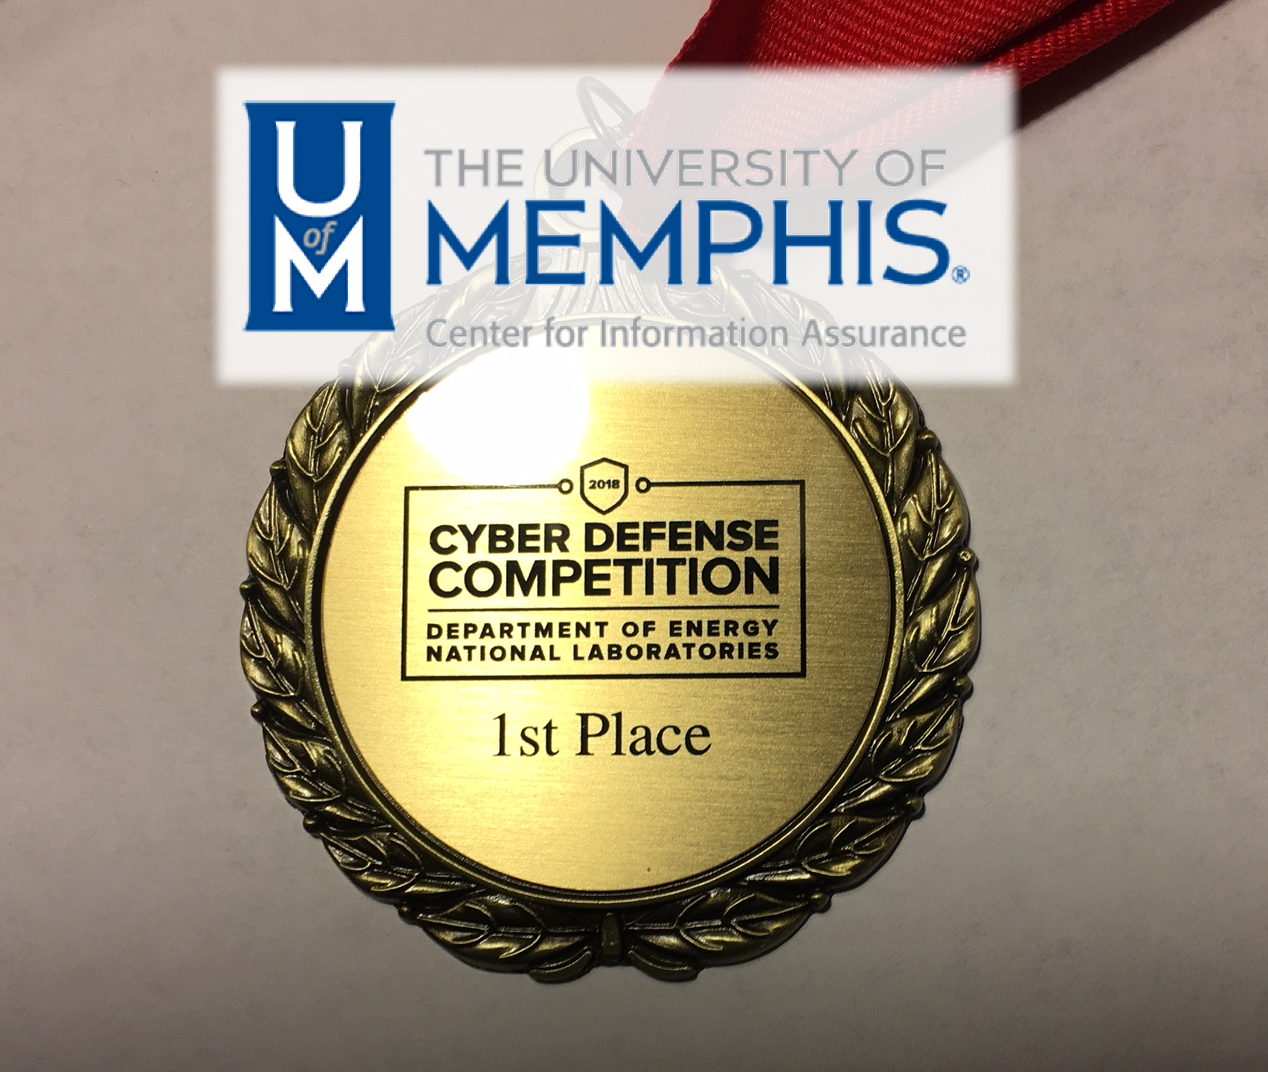 Cyber Defense Competition, Department of Energy National Laboratories 1st Place Medal. The University of Memphis, Center for Information Assurance Logo is covering the top of this picture